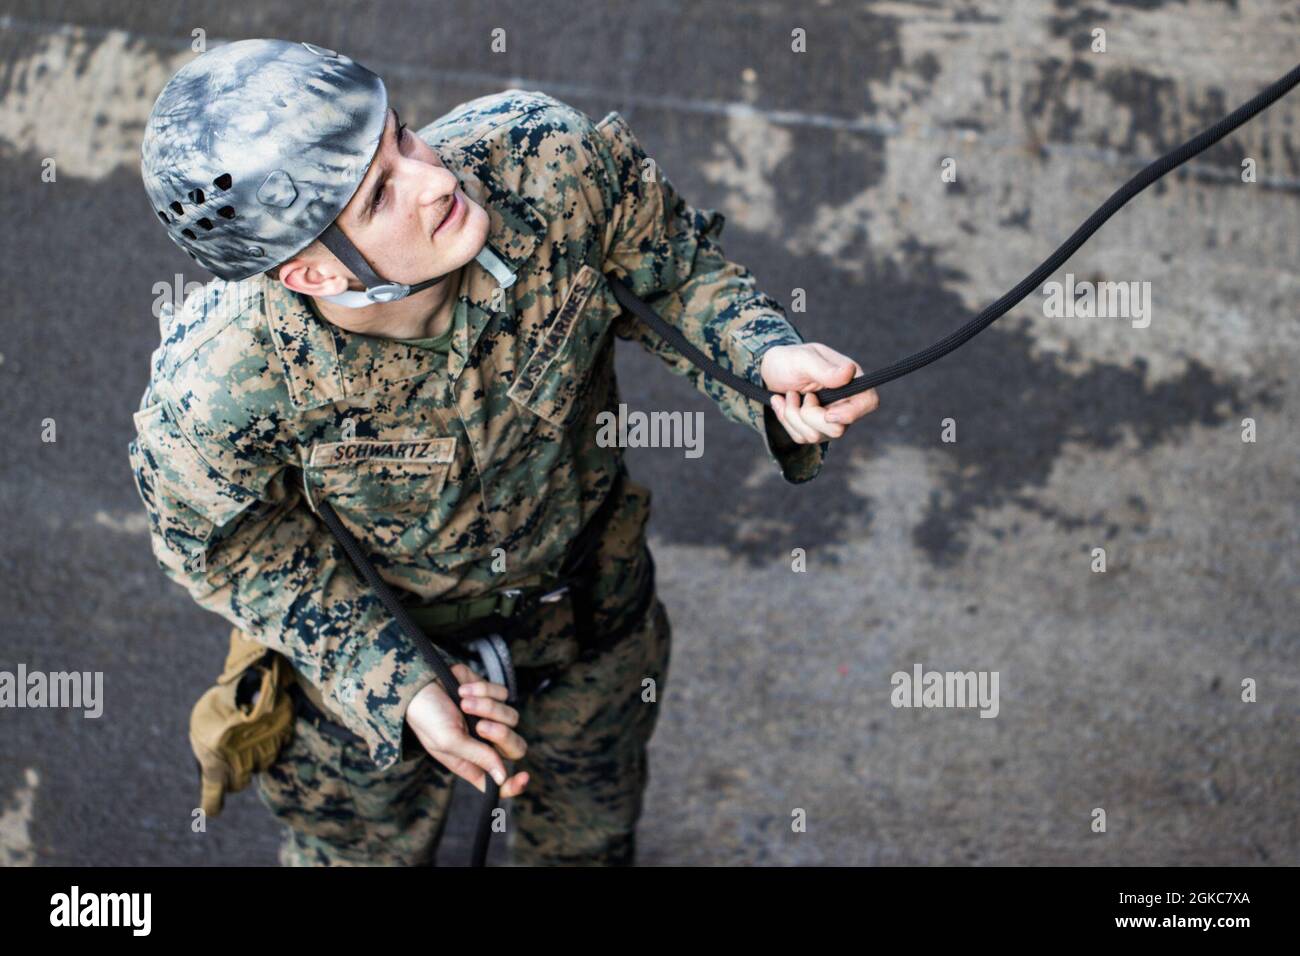 U.S. Marine Lance Cpl. Carter Schwartz, an infantry rifleman with Kilo Company, Battalion Landing Team 3/4, 31st Marine Expeditionary Unit (MEU), stands as the belayer at the bottom of the rope during rappelling training aboard dock landing ship USS Ashland (LSD 48) on the shore of U.S. Naval Base Guam, March 10, 2021. The 31st MEU is operating aboard ships of Amphibious Squadron 11 in the 7th fleet area of operations to enhance interoperability with allies and partners and serve as a ready response force to defend peace and stability in the Indo-Pacific region. Stock Photo